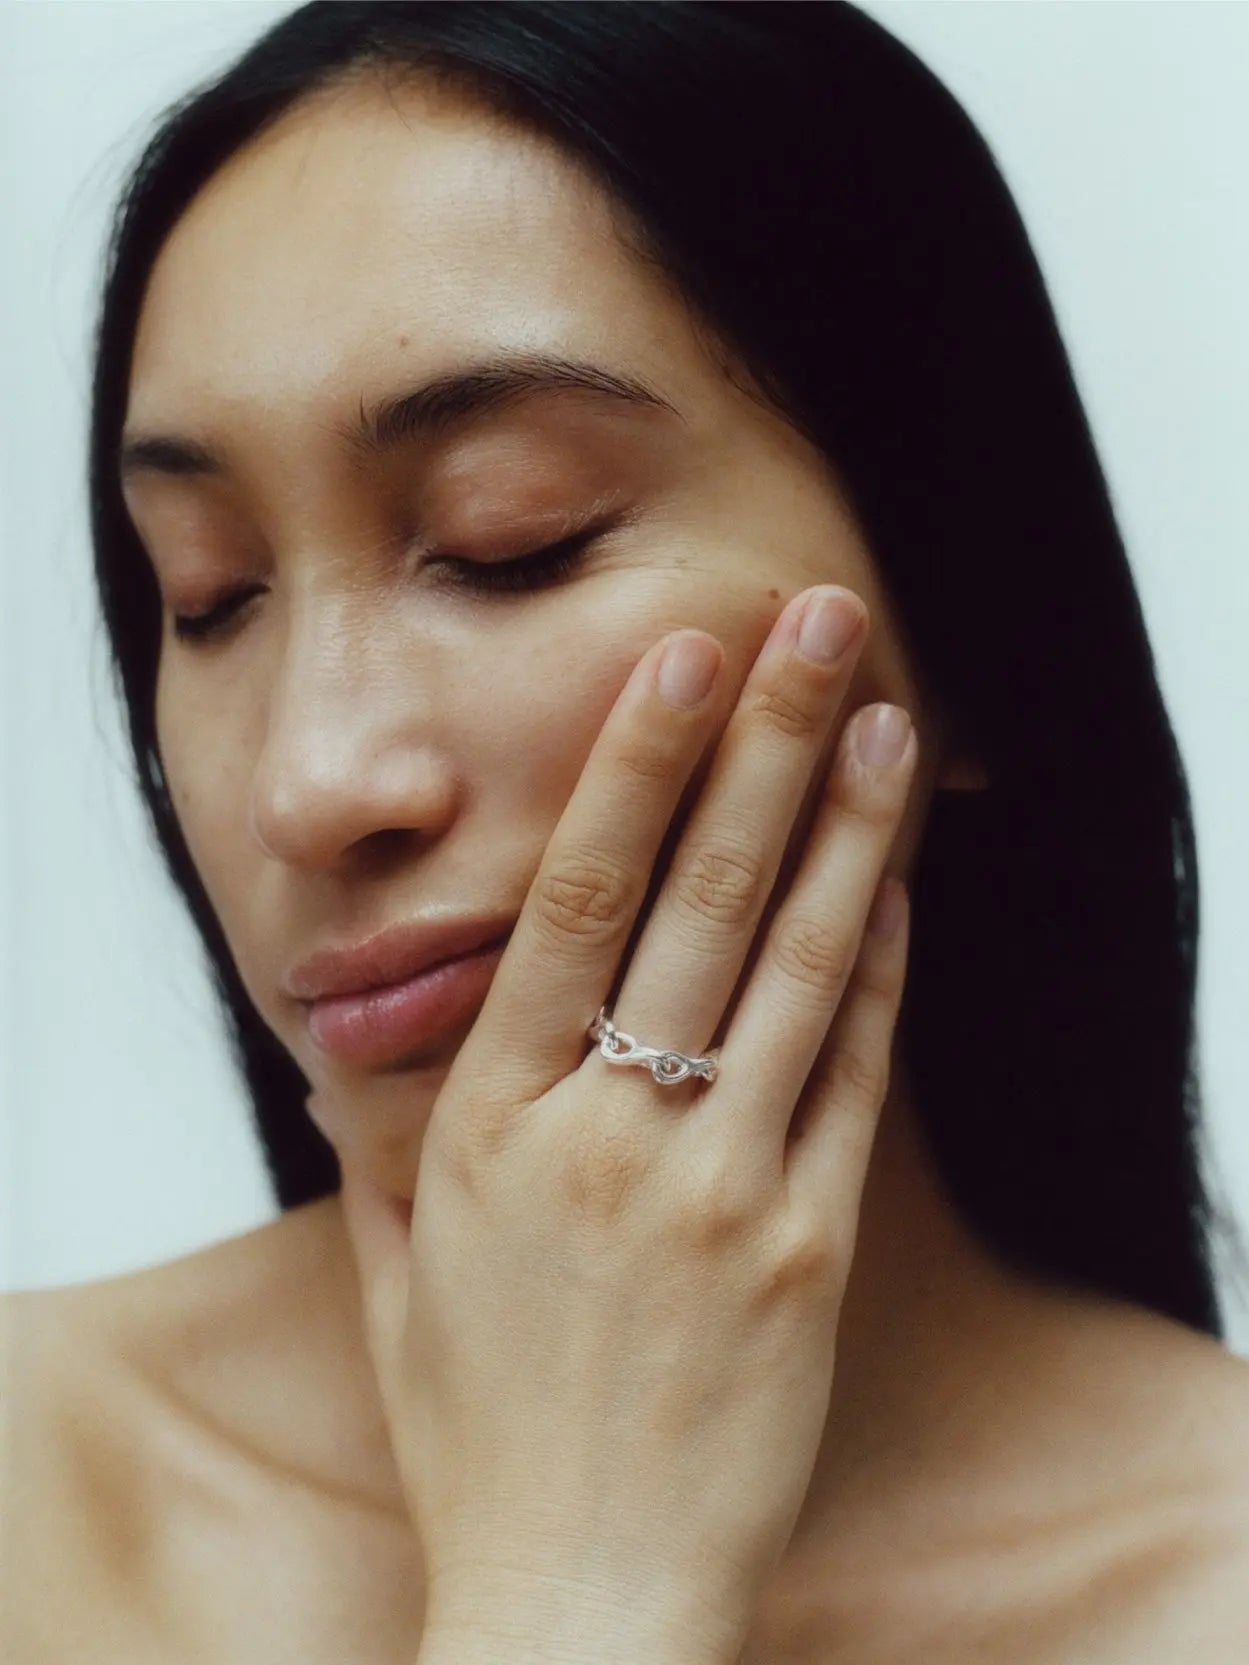 A silver Elo Chain Ring with an intricate, wavy design sits against a plain white background. Available at Bassalstore in Barcelona, the ring's band features interconnected loops and curves, giving it an elegant and unique appearance. Created by Nathalie Schreckenberg.